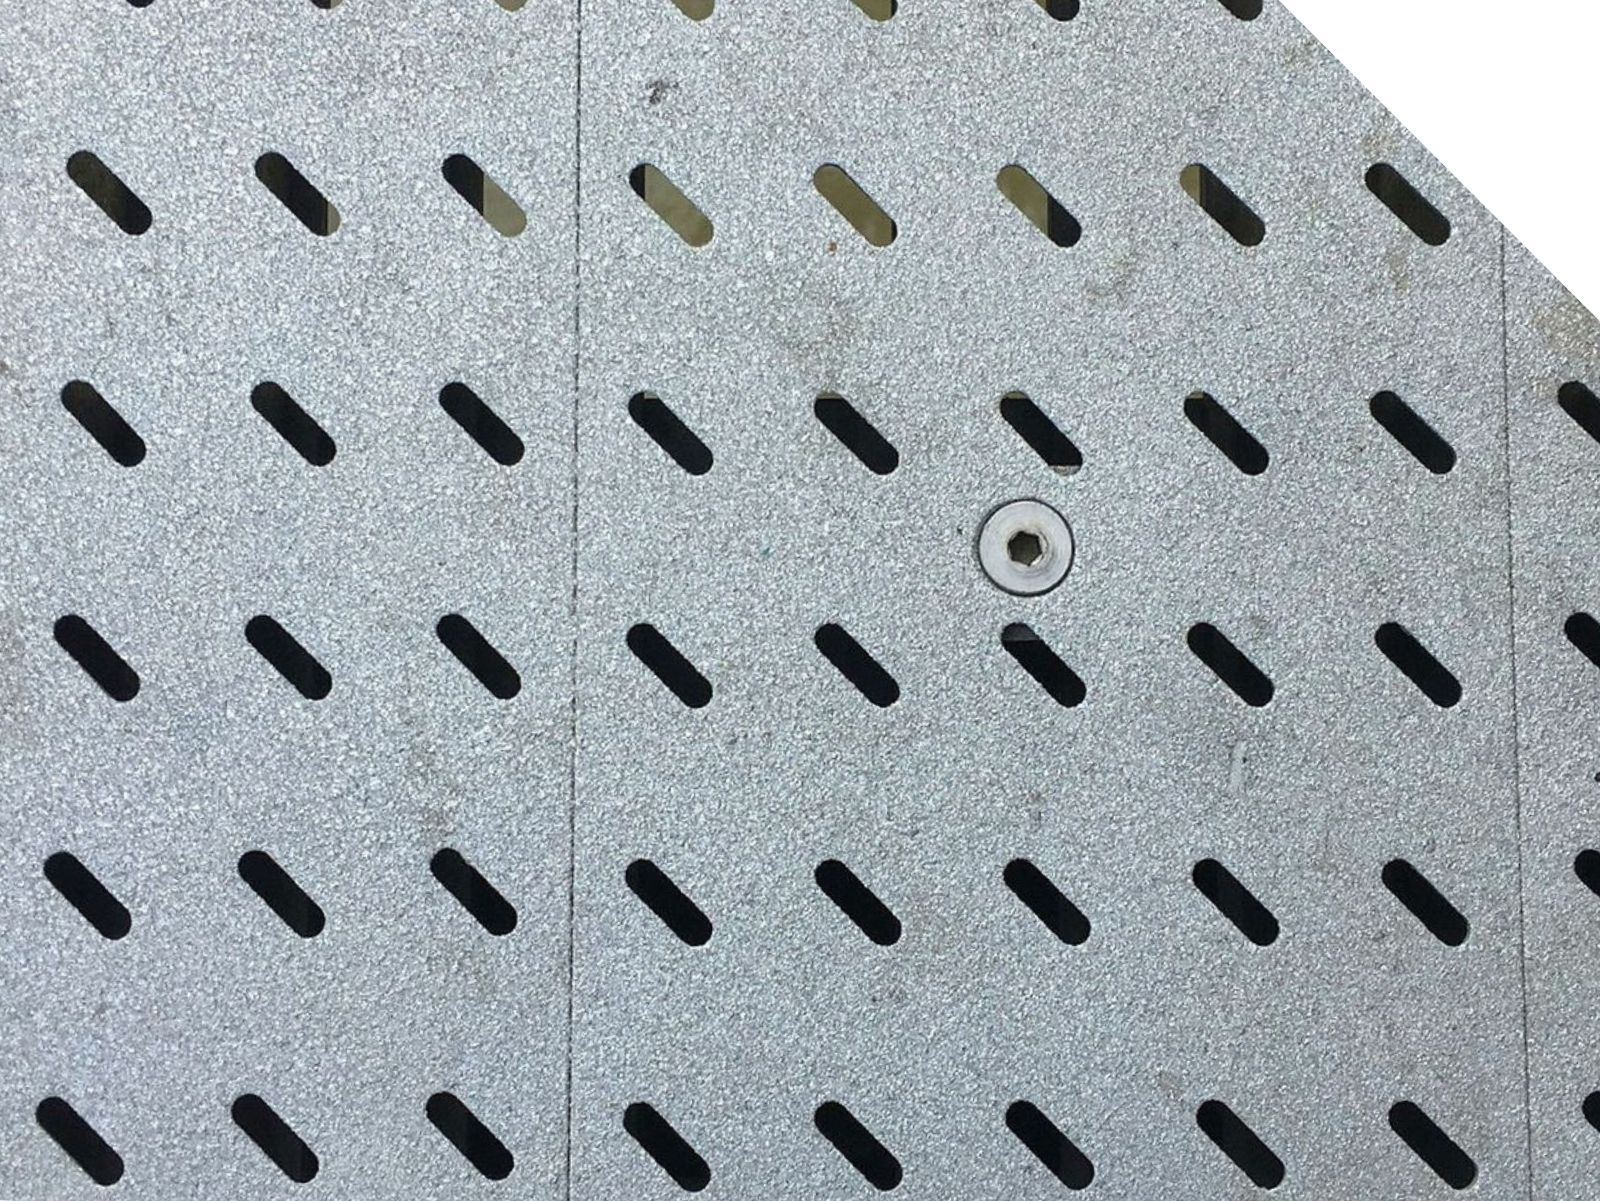 Ongrip metal spray traction surface technology applied to a metal plate